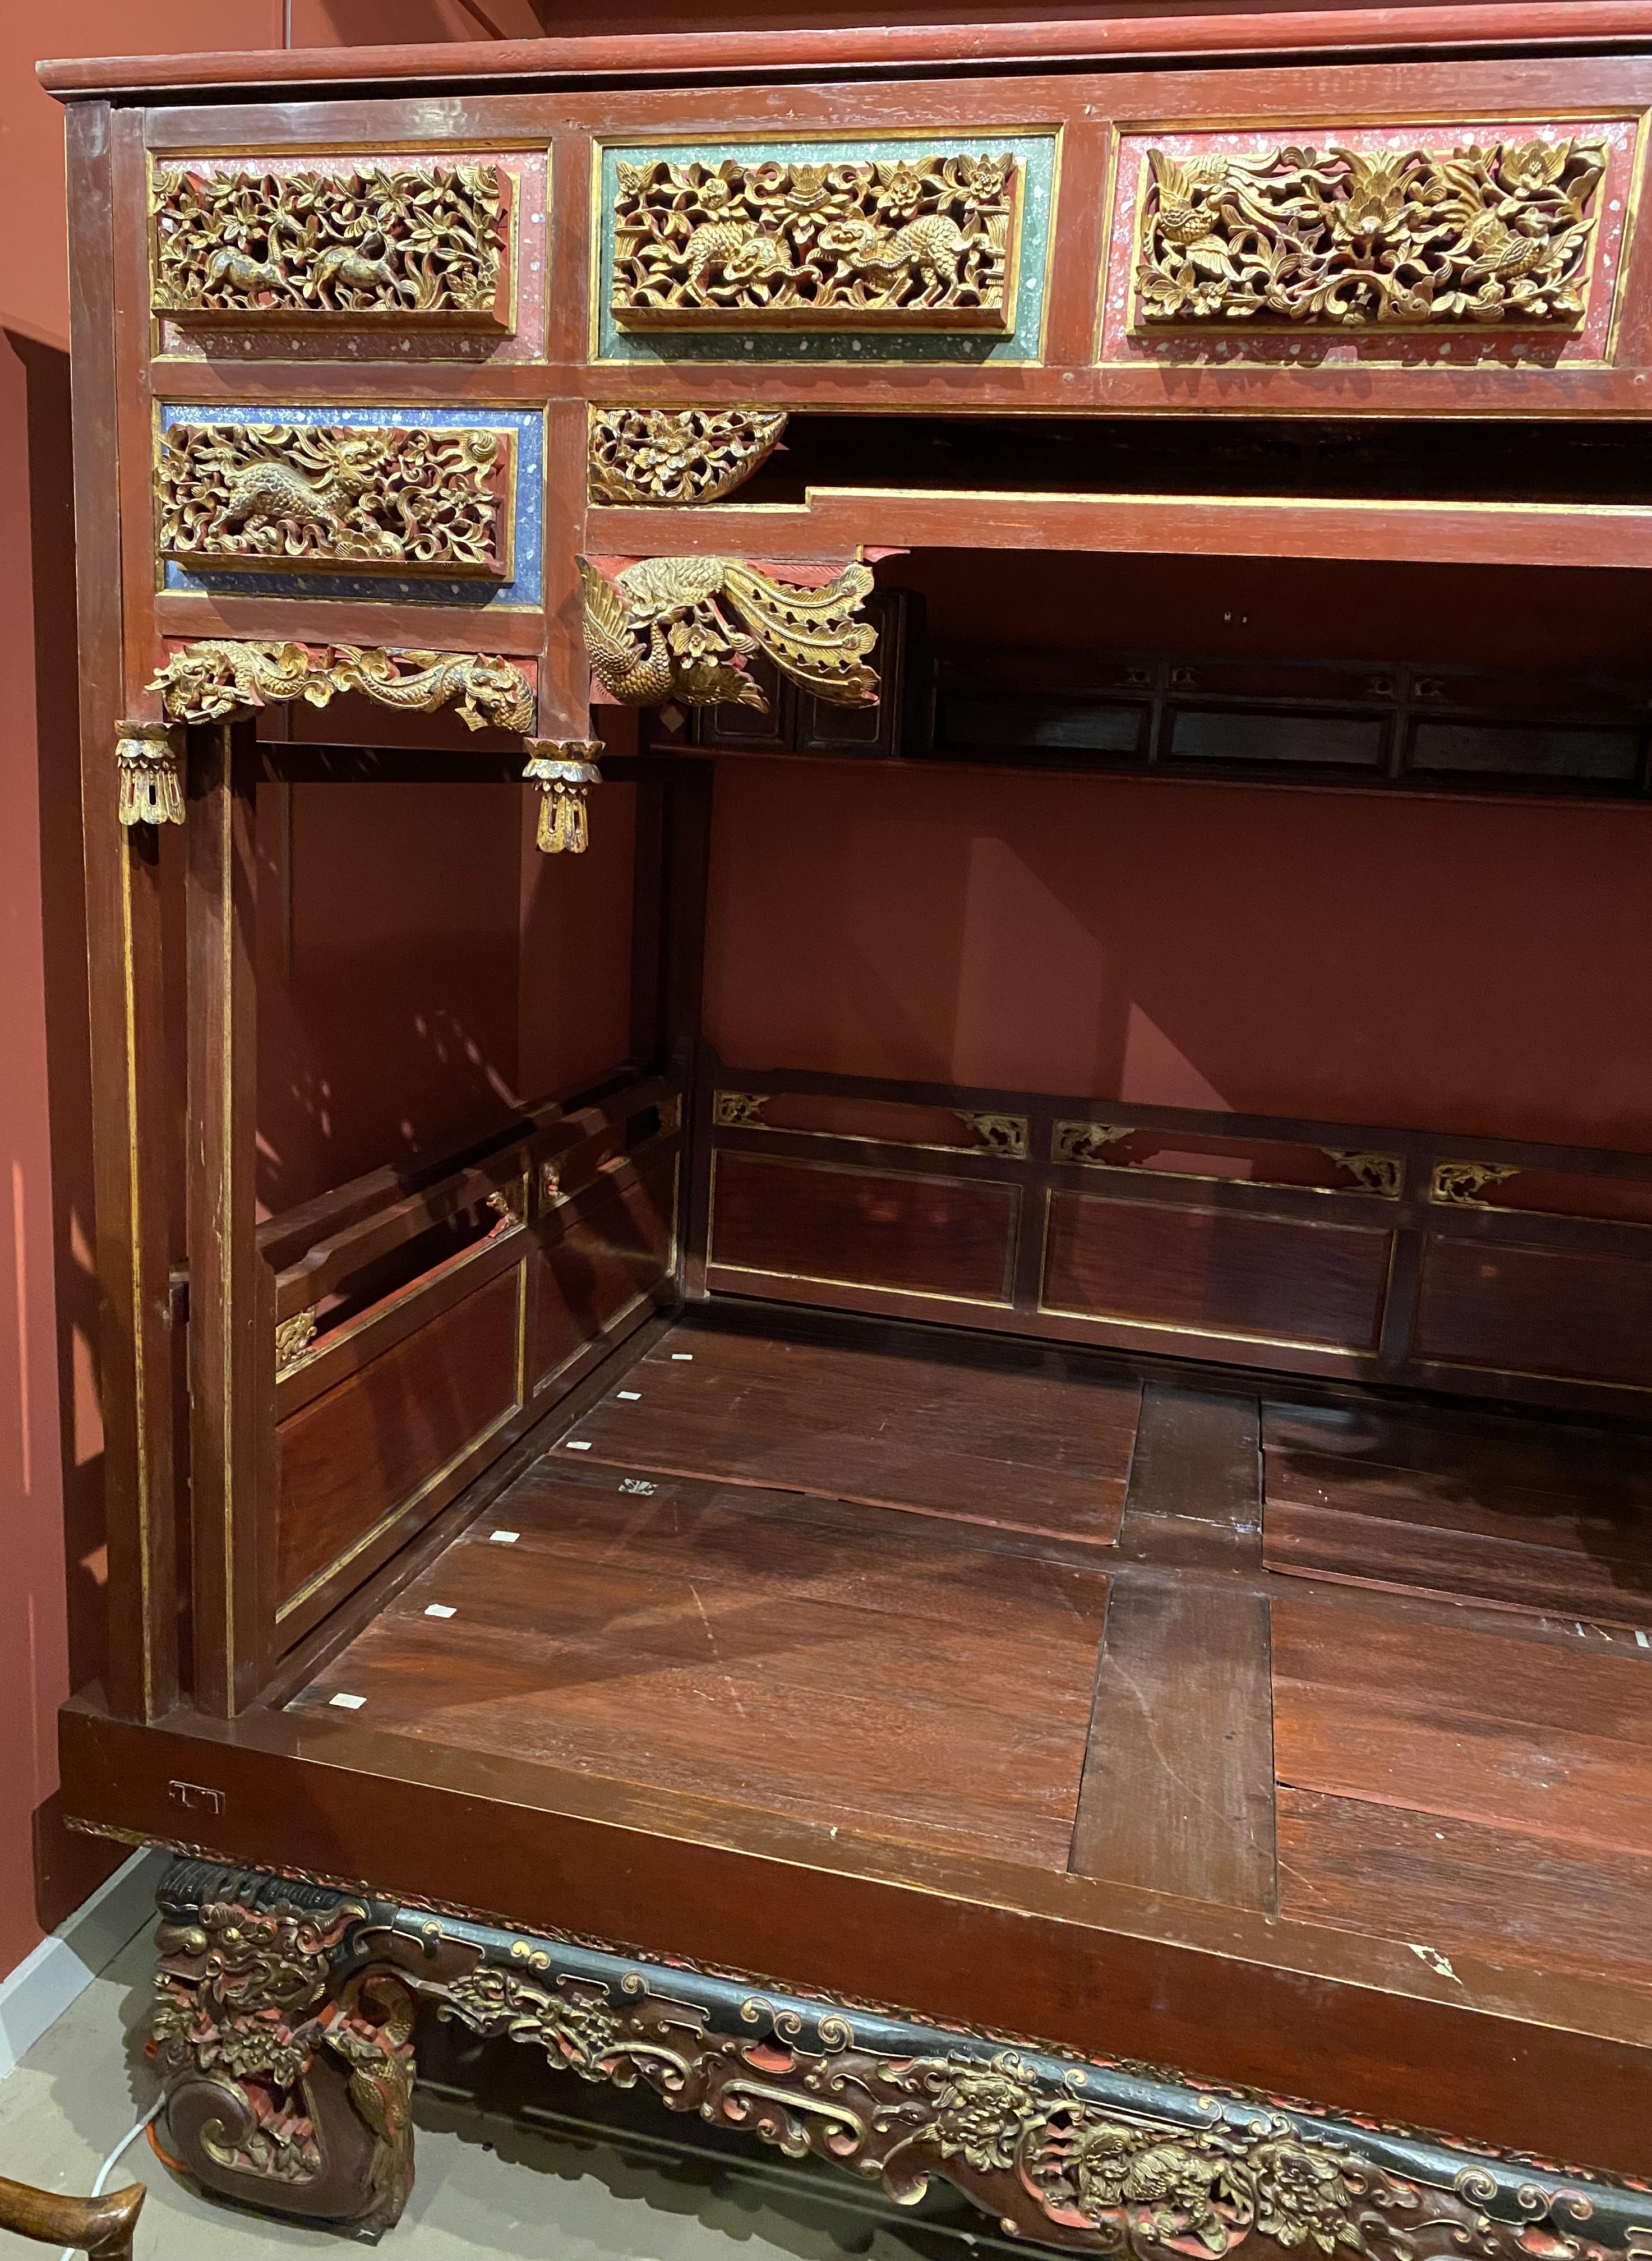 An impressive Chinese canopy wedding bed with pierce carved polychrome and gilt panels and supports featuring dragons, deer, peacocks, serpents, and other animals, as well as vines and flowers surrounding a  sleeping platform that will accommodate a